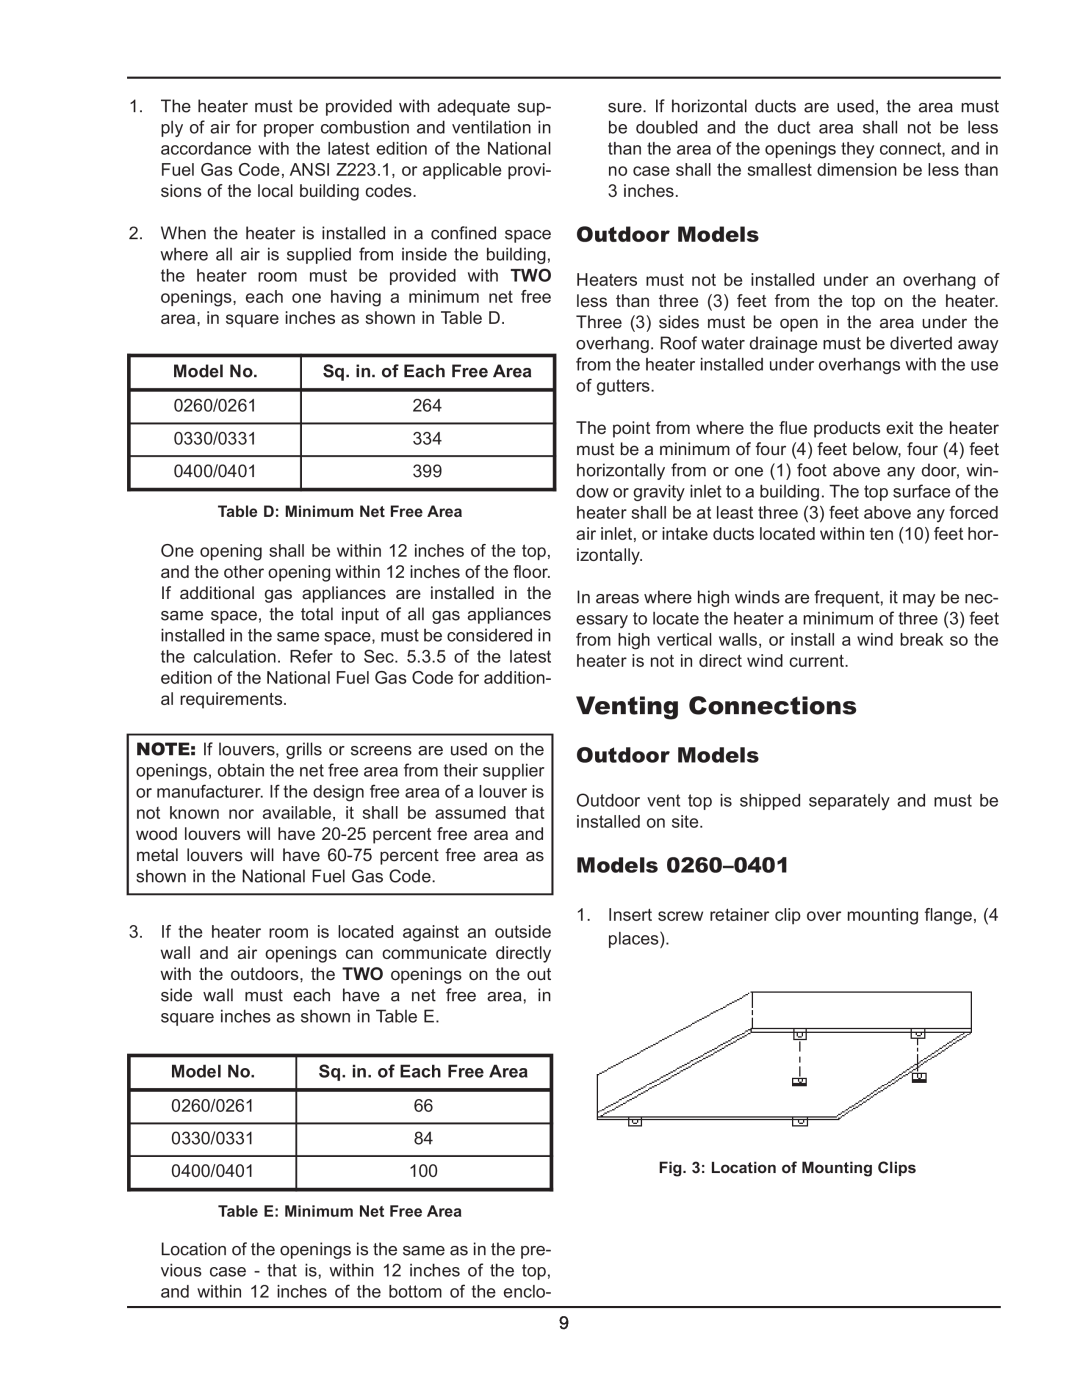 Raypak 2600401 operating instructions Venting Connections, Outdoor Models, Model No, Sq. in. of Each Free Area 